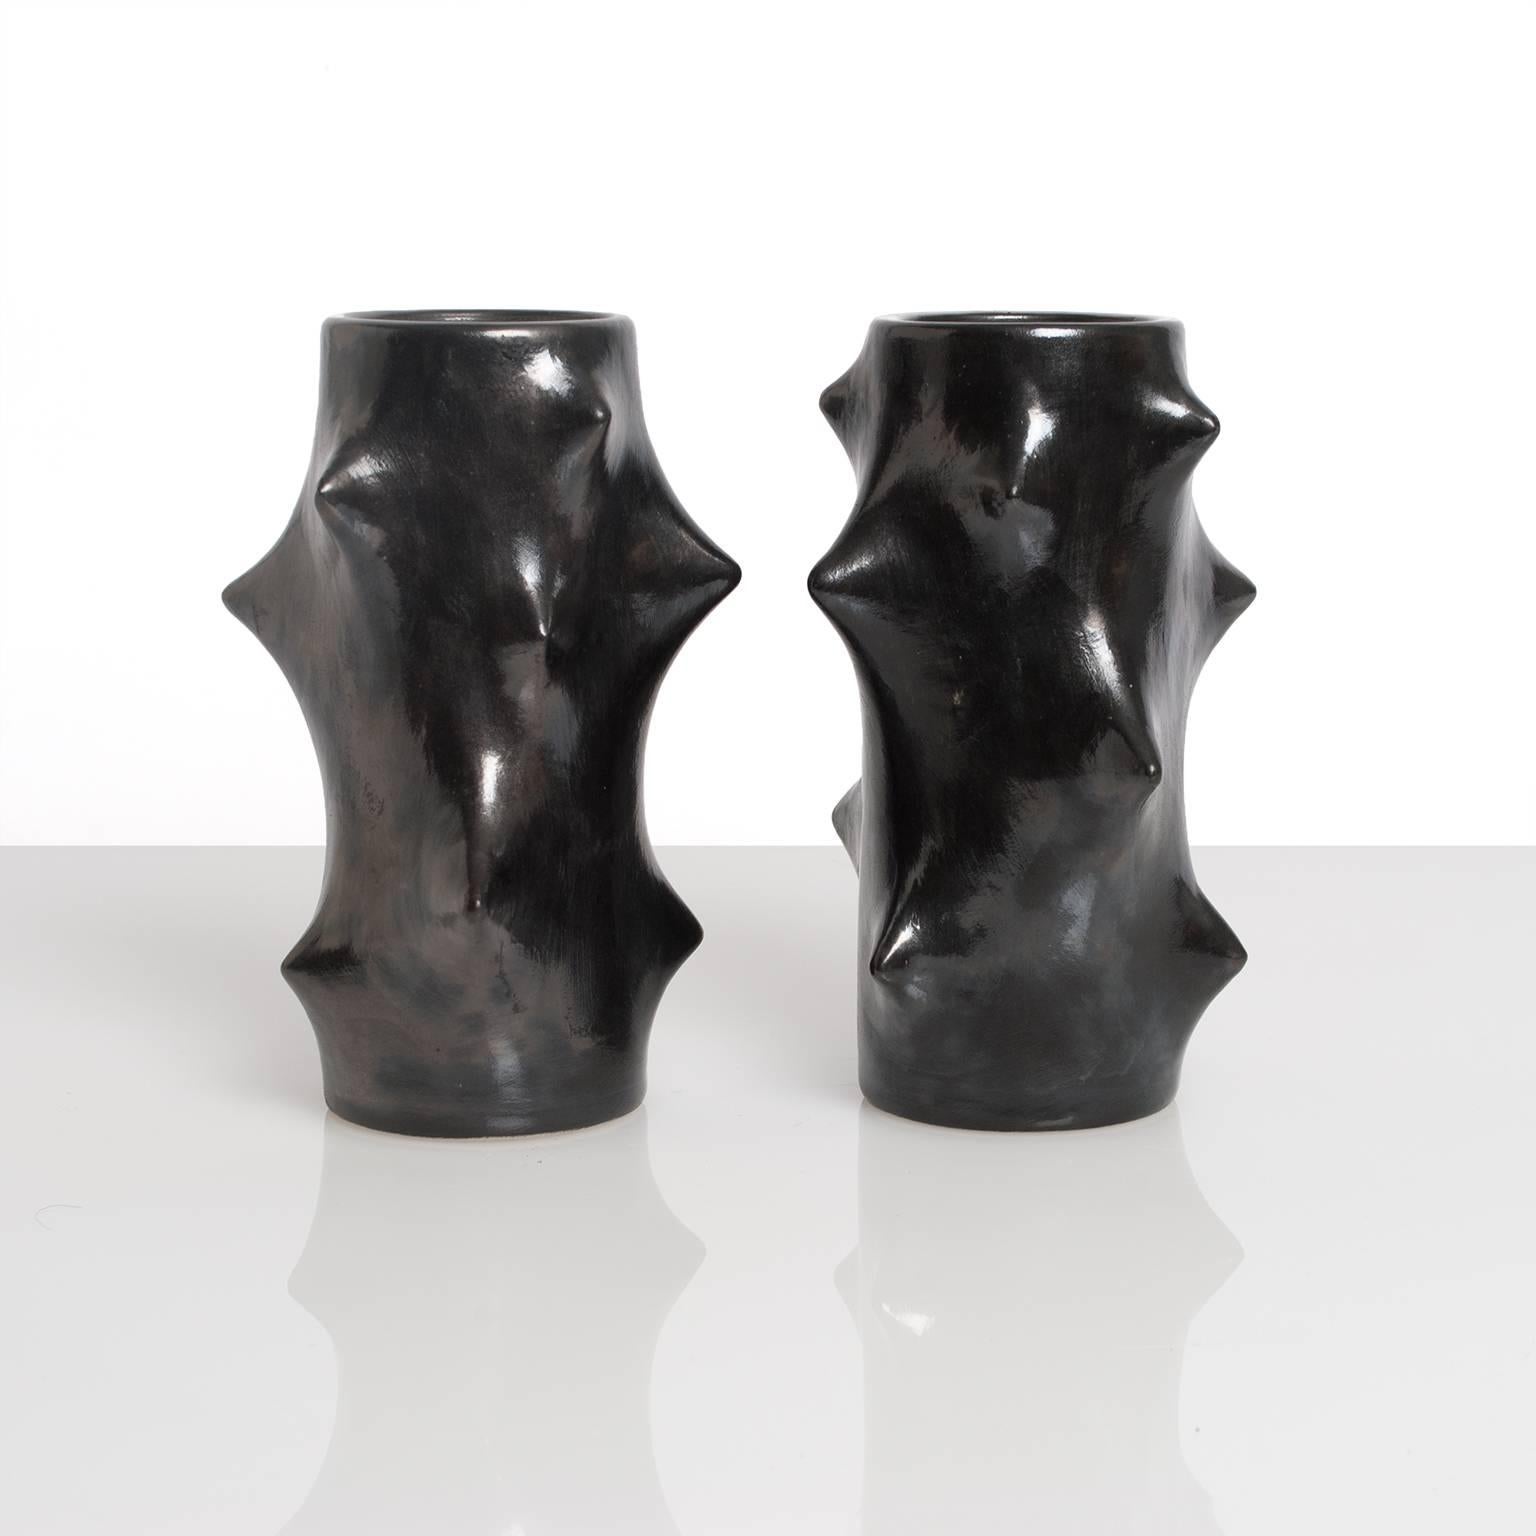 Two Scandinavian Modern Mid-Century ceramic vases by Knud Basse for Michael Andersen & Sons. These 